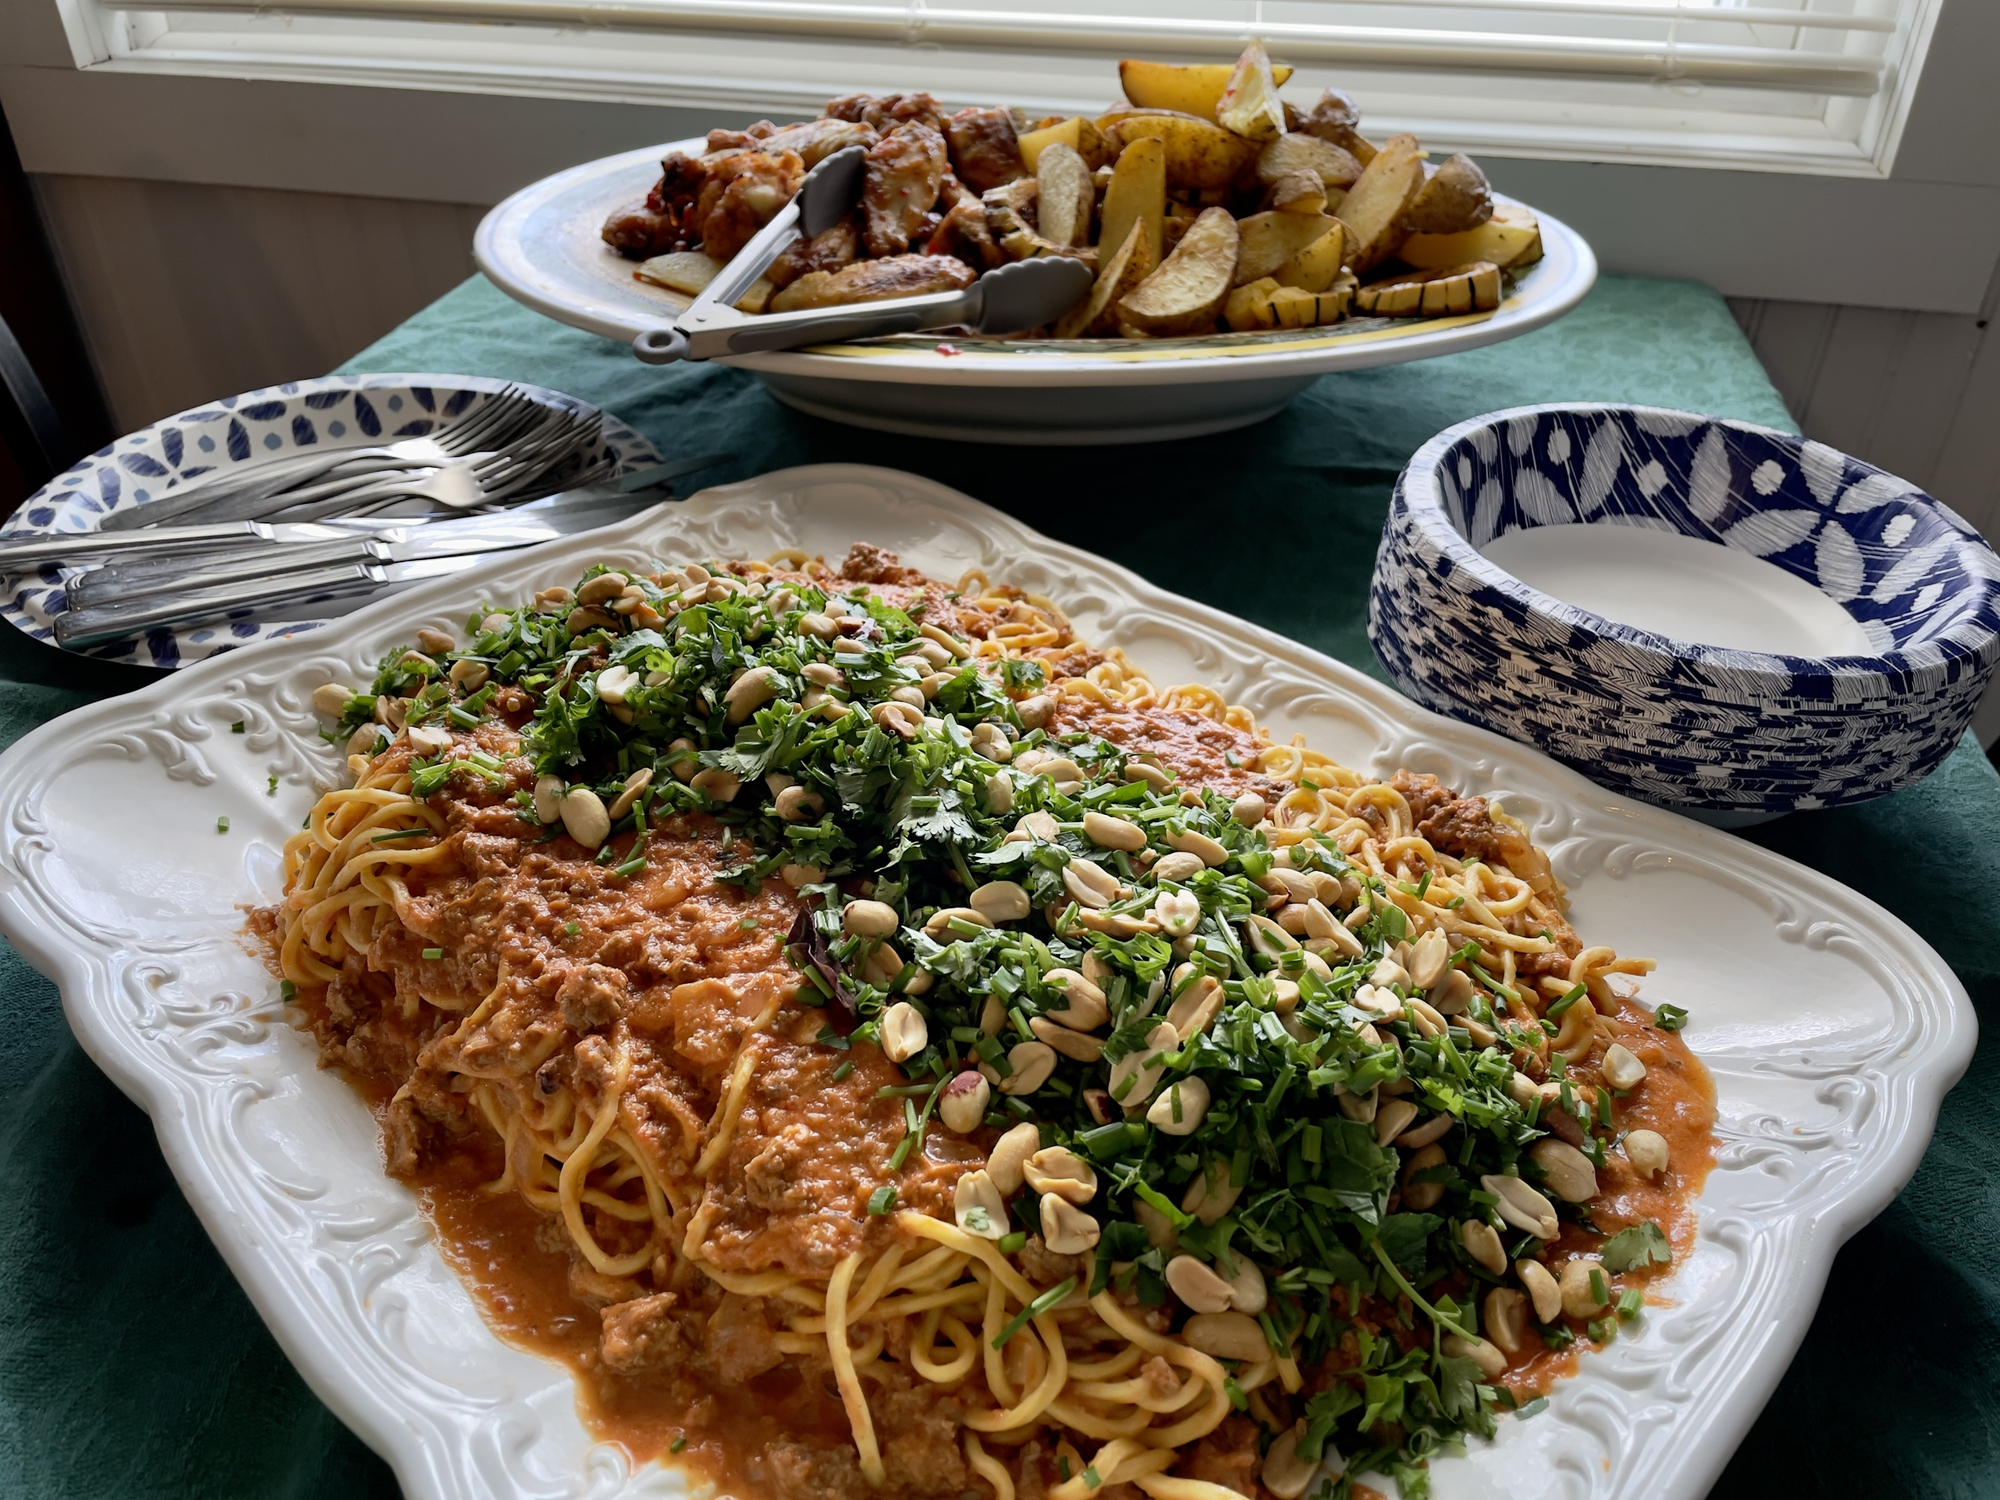 A plate of spaghetti with tomato sauce, topped with herbs and nuts, served with side dishes in the background